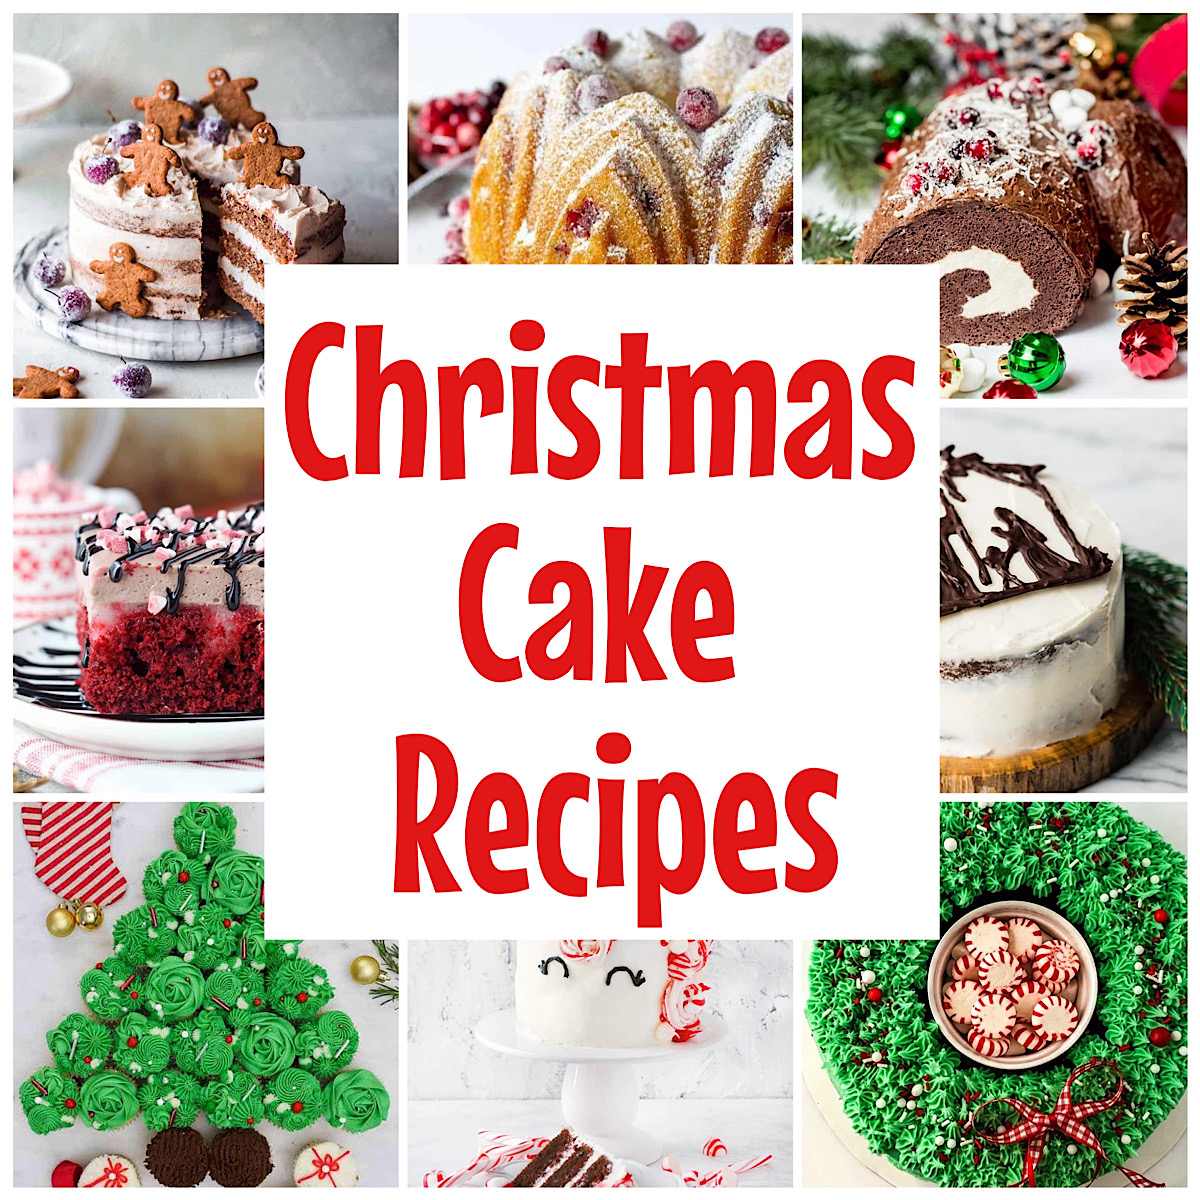 23 Christmas Cakes That Bring the Holiday Cheer | Epicurious